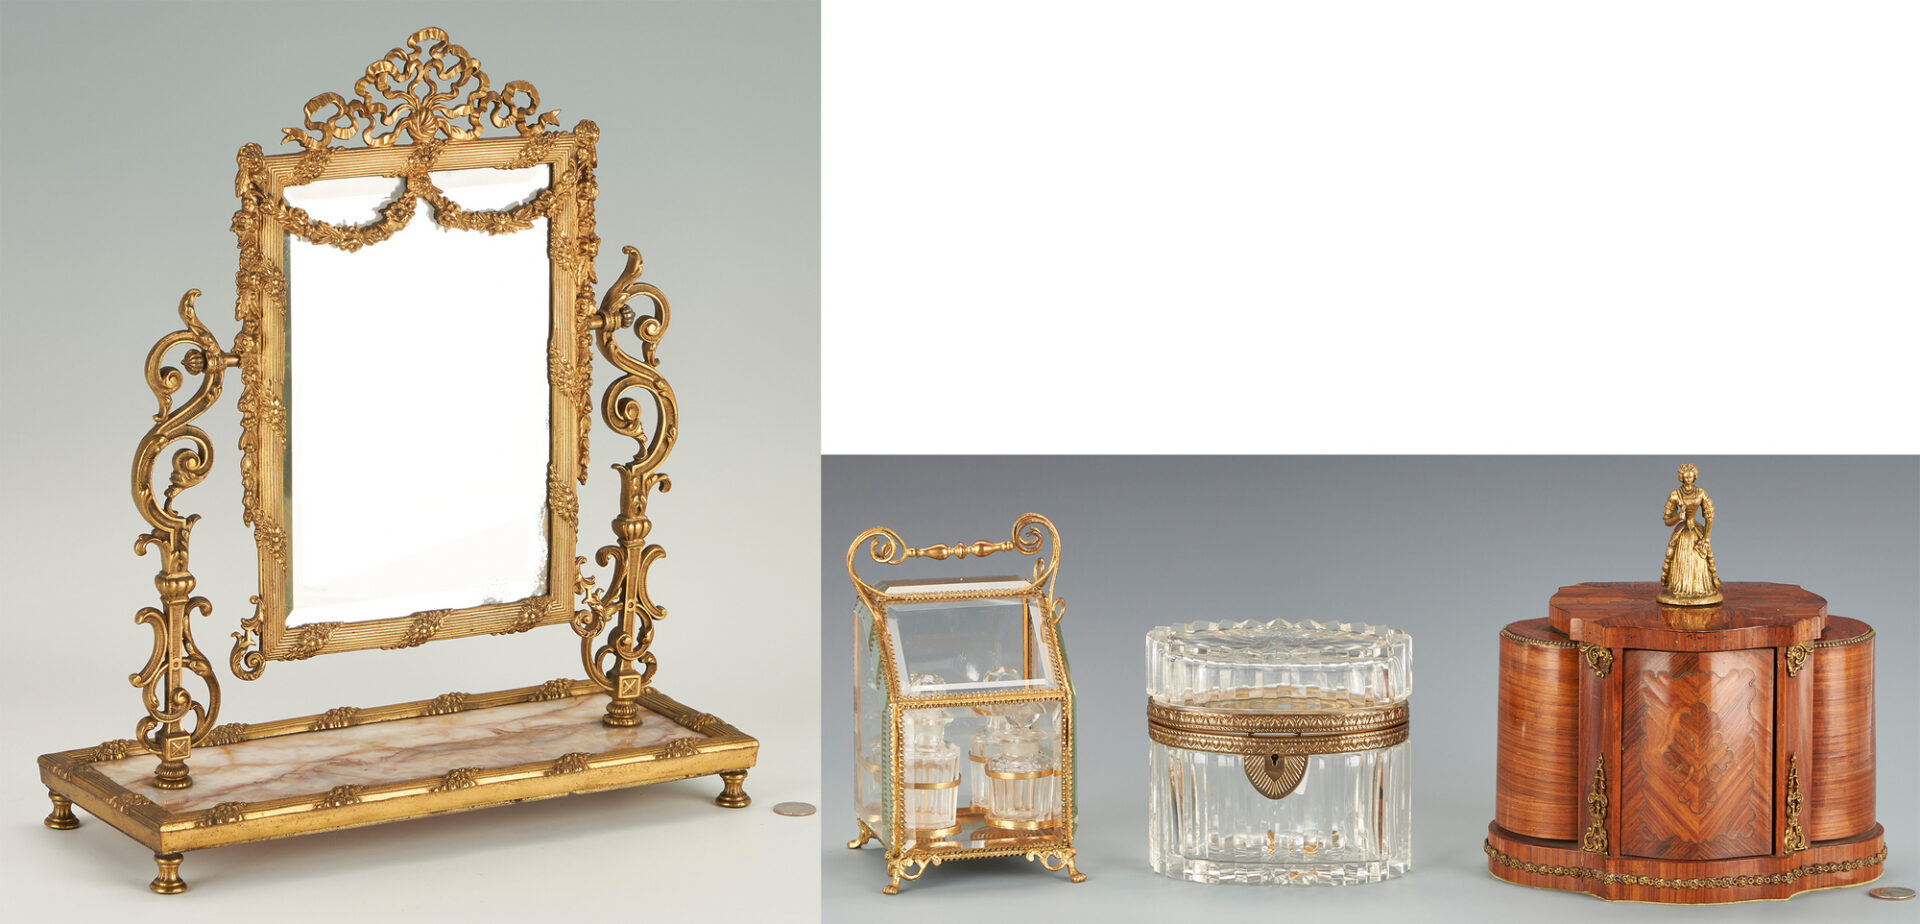 Lot 255: Decorative European Boxes, incl. French Marquetry and Gilt Marble Vanity Mirror, Total 4